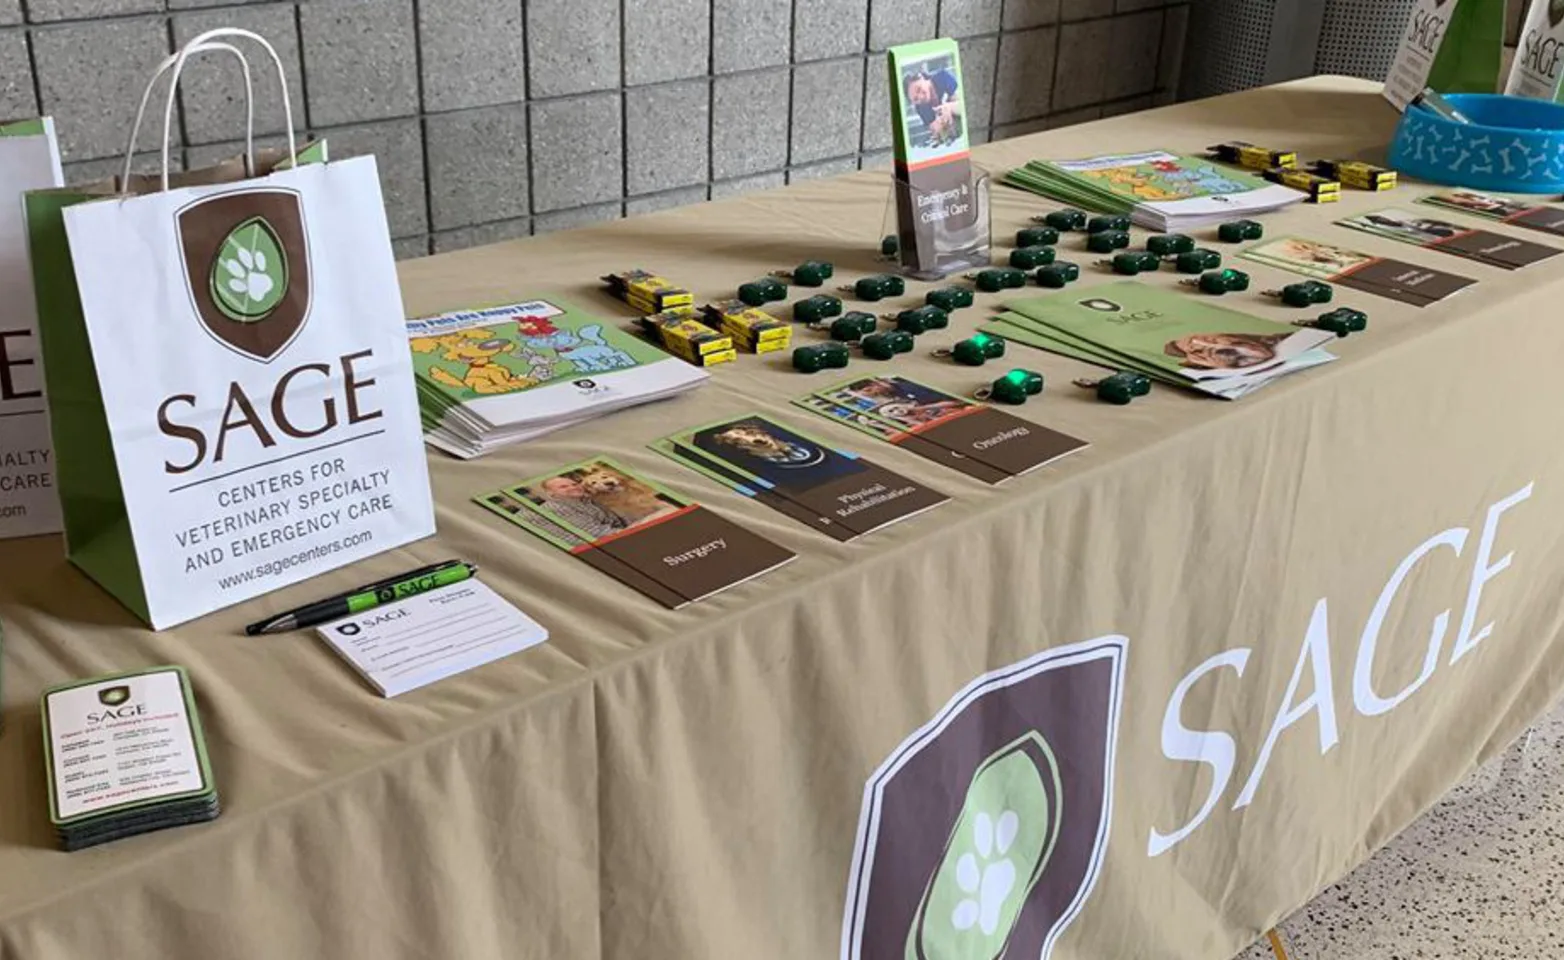 SAGE Booth at a Veterinary Event